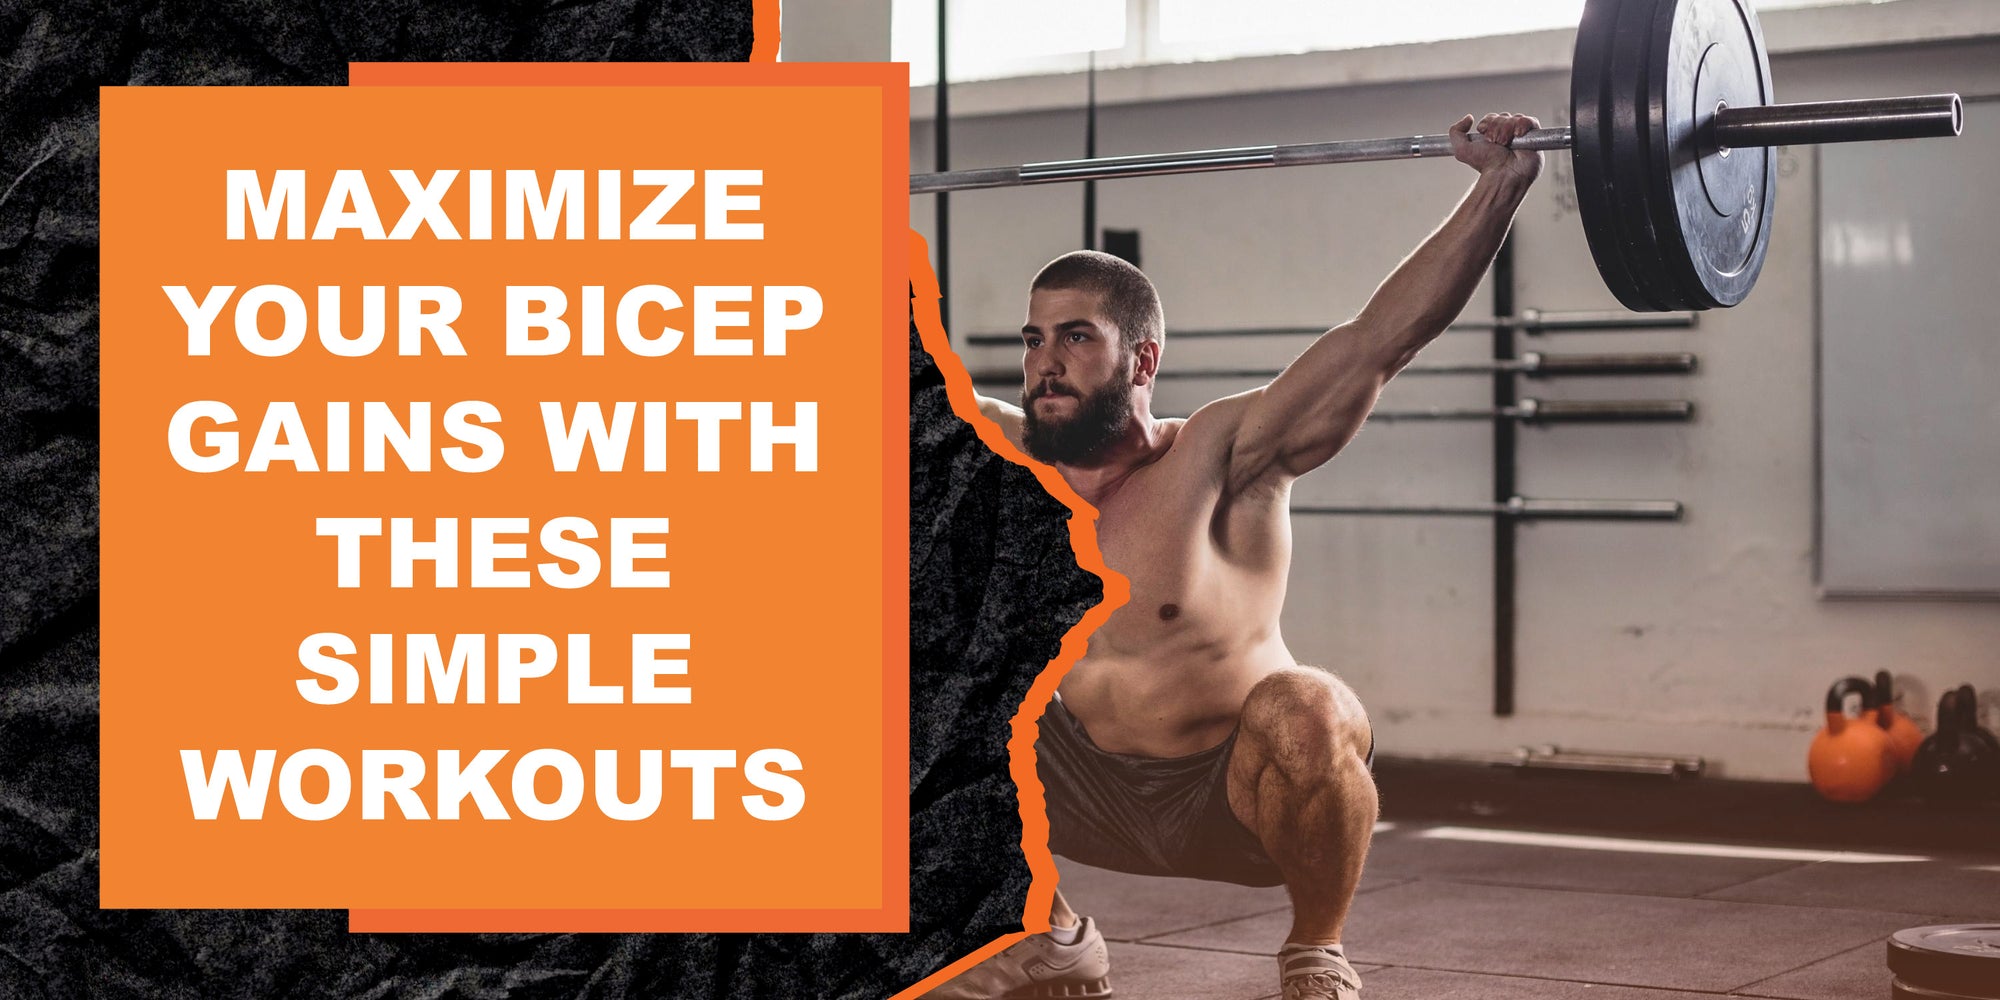 Maximize Your Bicep Gains with these Simple Workouts